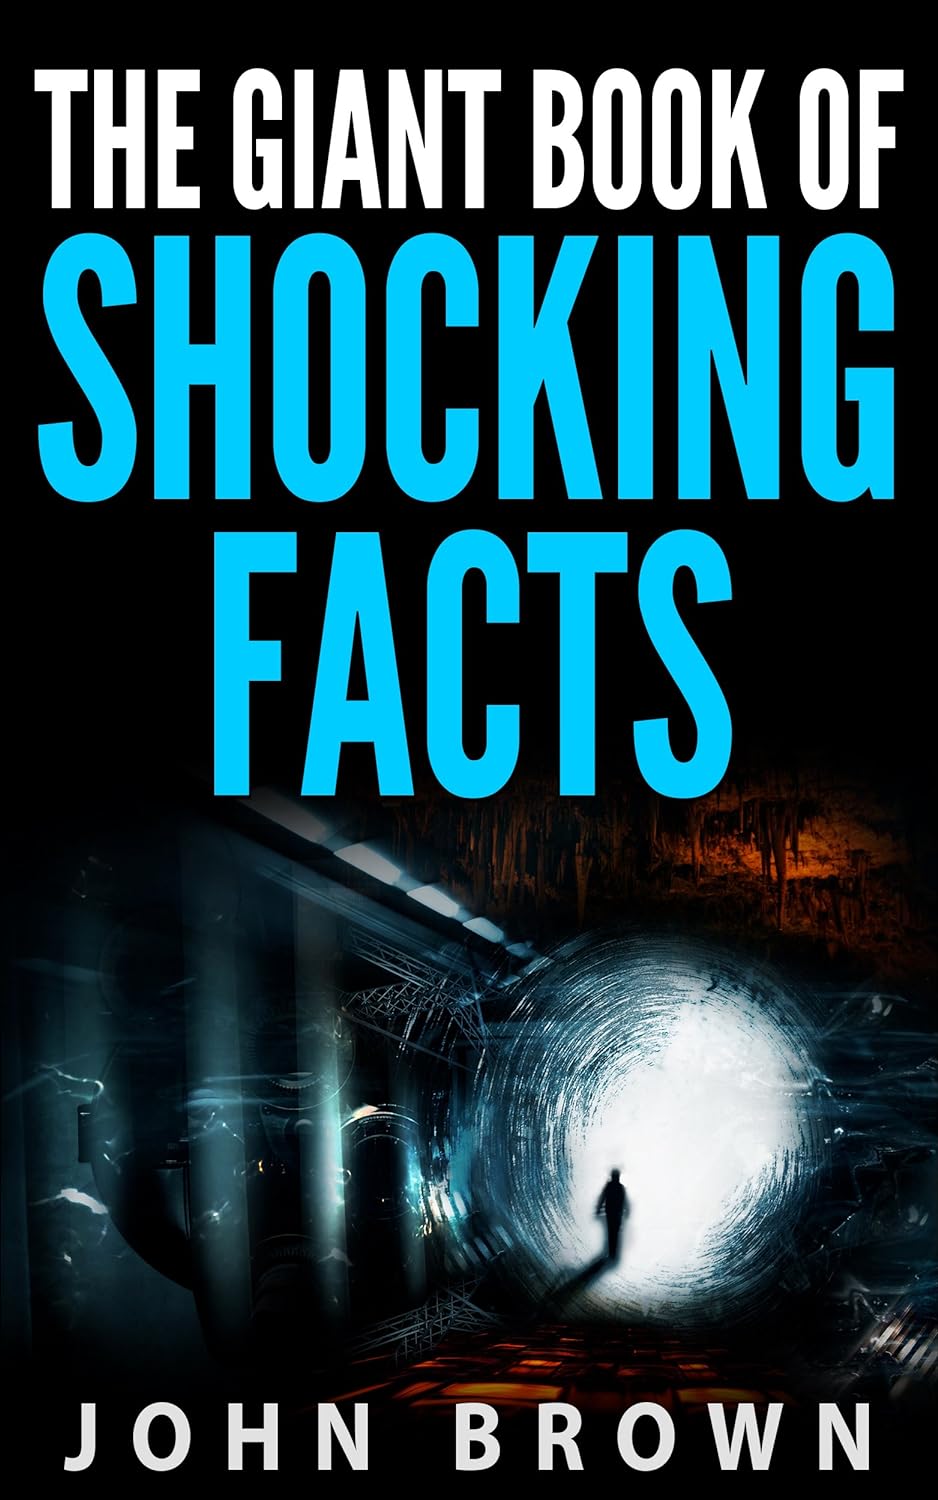 The Giant Book of Shocking Facts